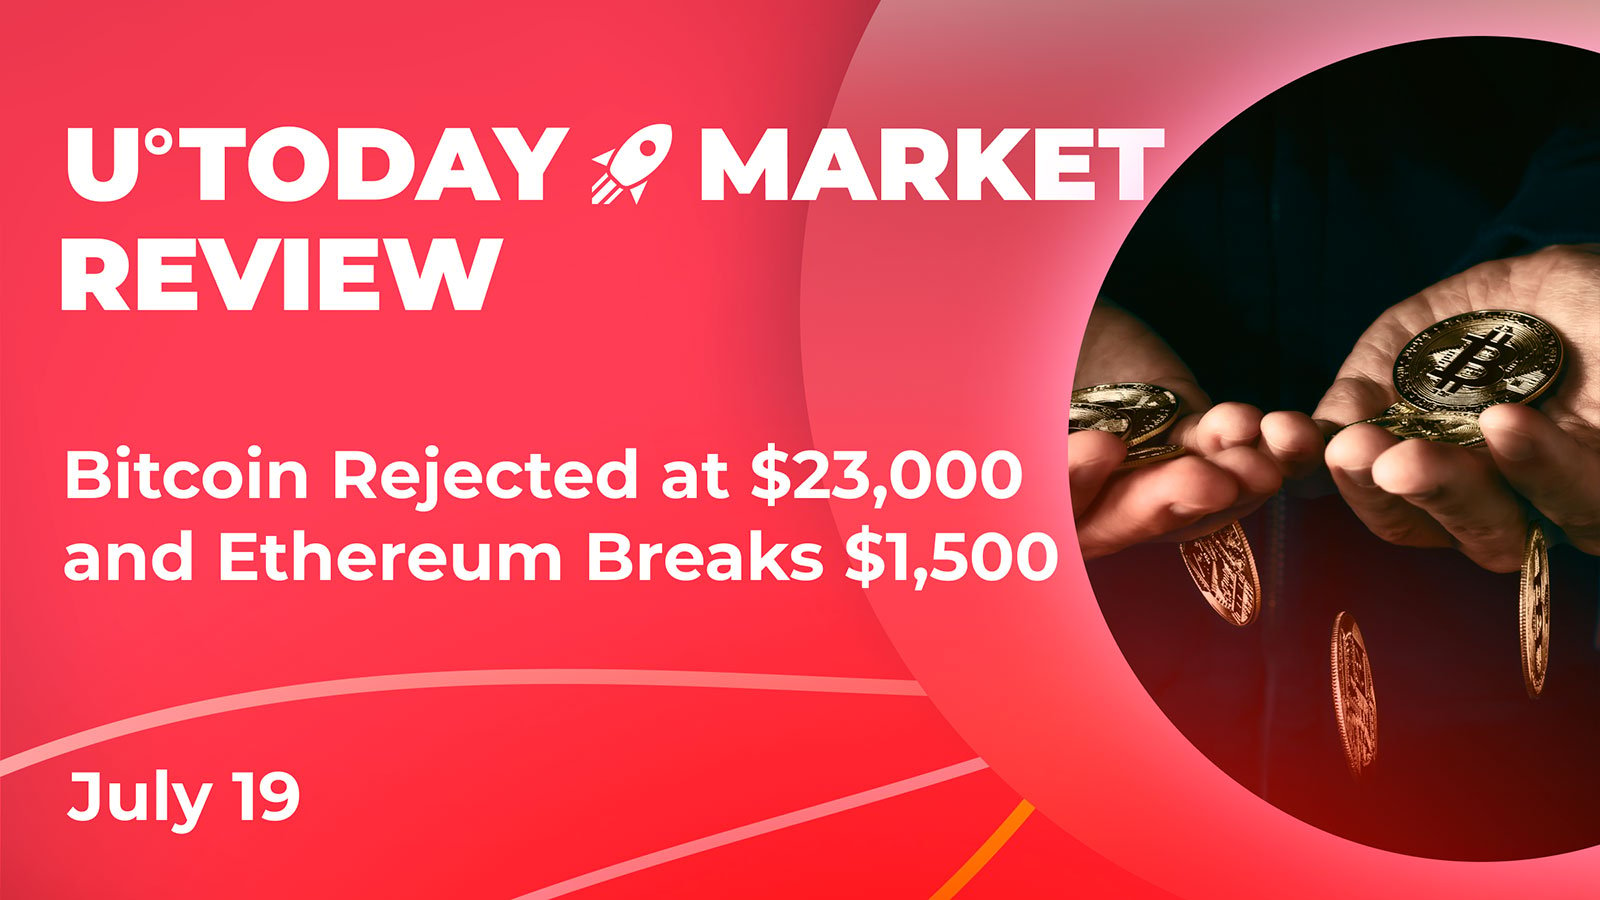 Bitcoin Rejected at $23,000 and Ethereum Breaks $1,500, Here’s What’s Might Be Next: Crypto Market Review, July 19